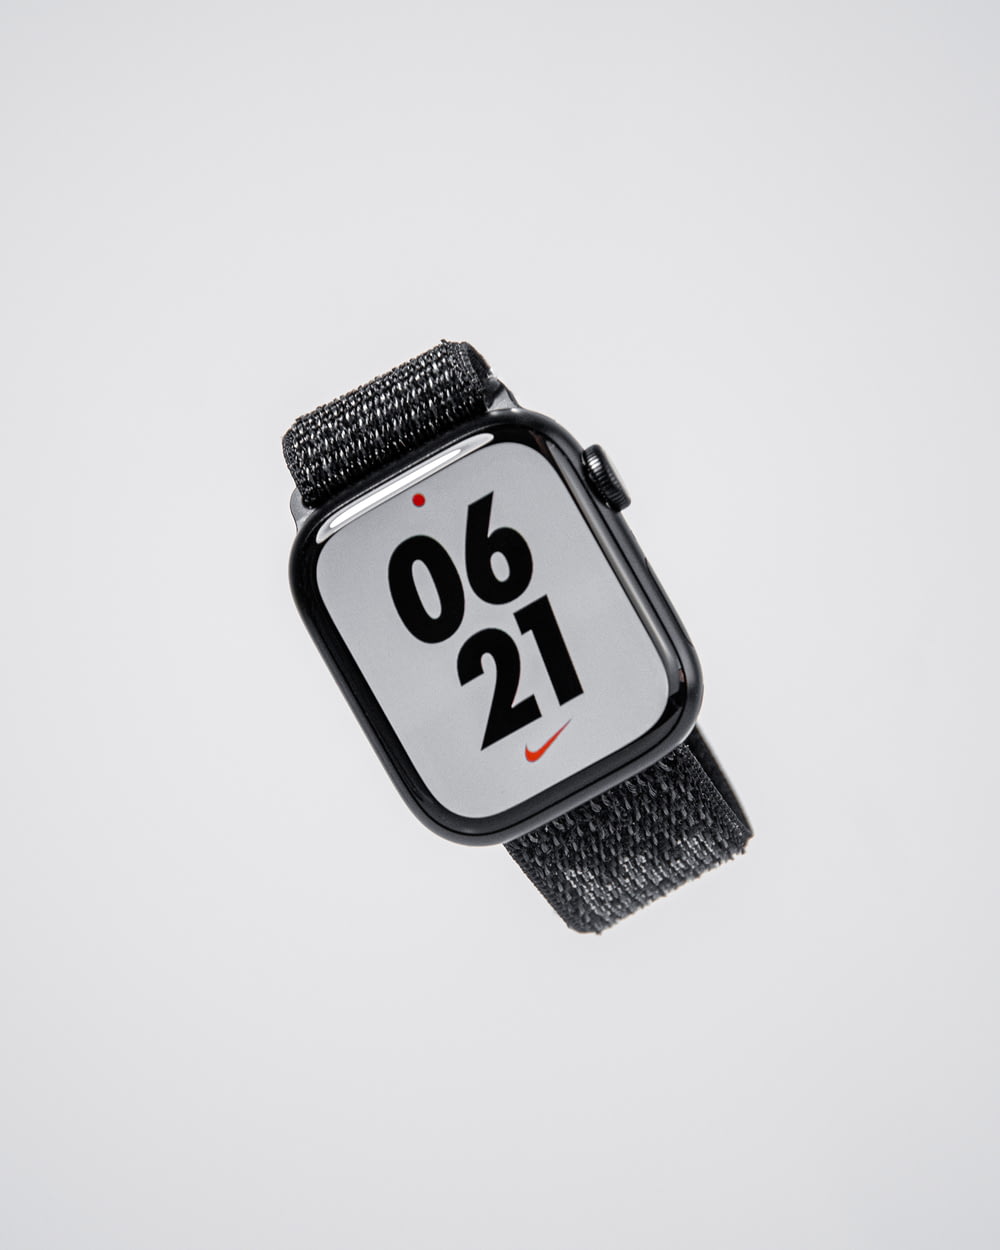 an apple watch with a nike logo on it